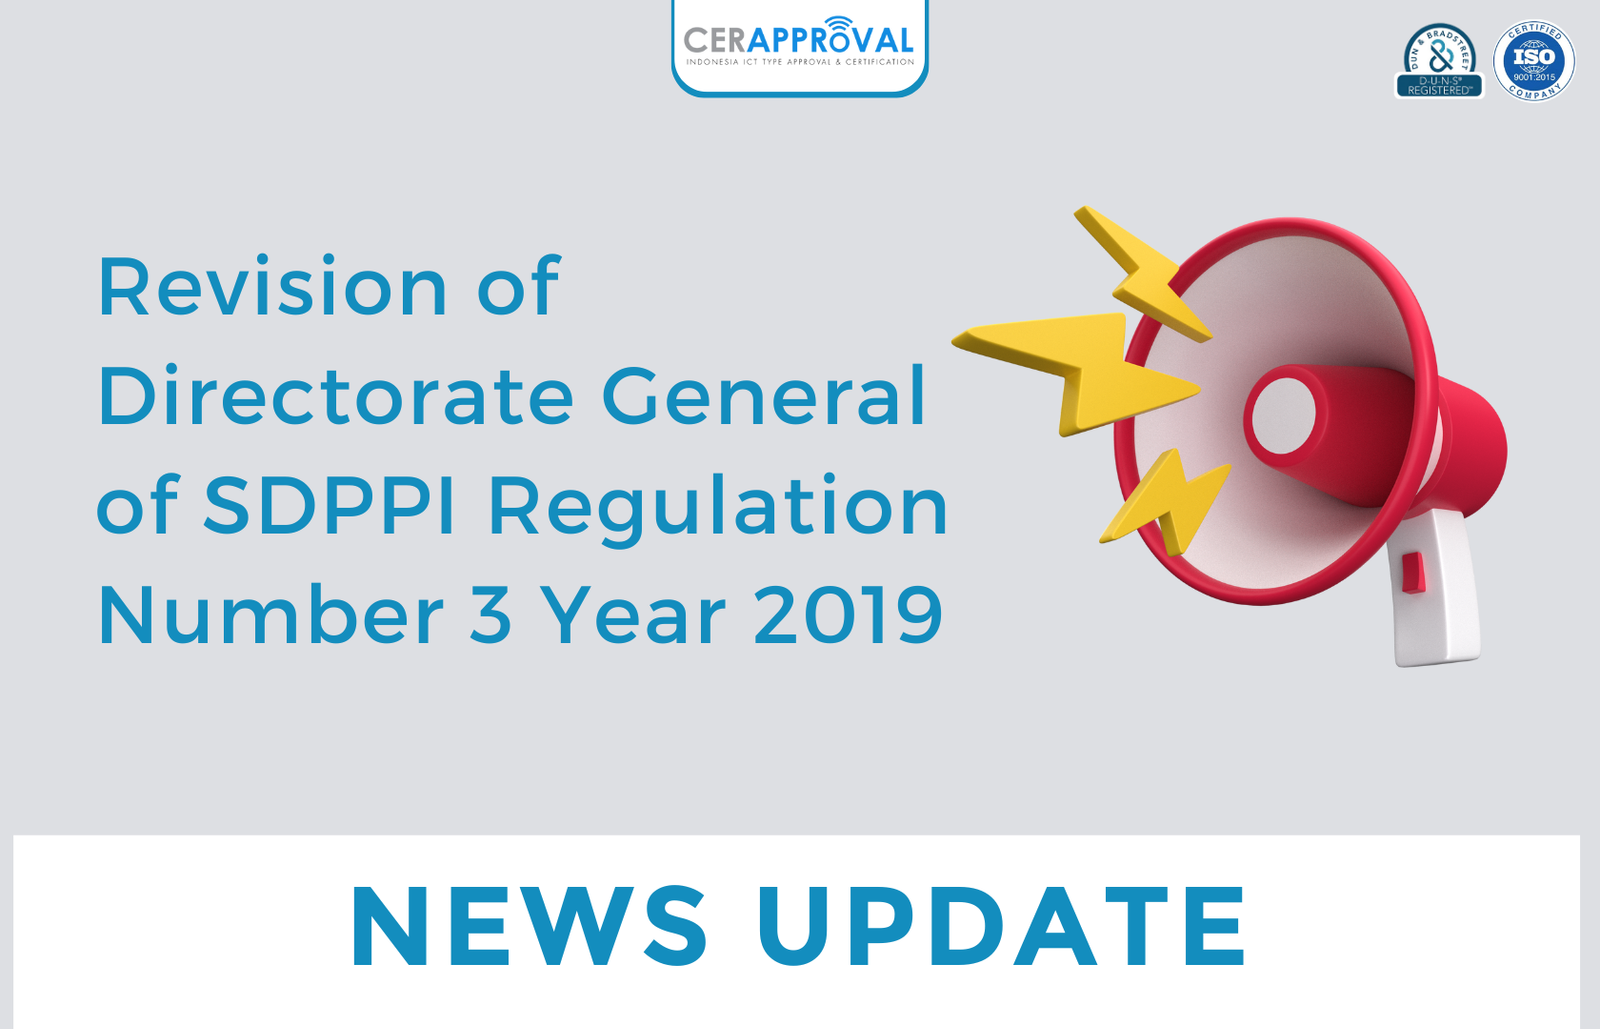 News Update : Revision of Directorate General of SDPPI Regulation Number 3 Year 2019